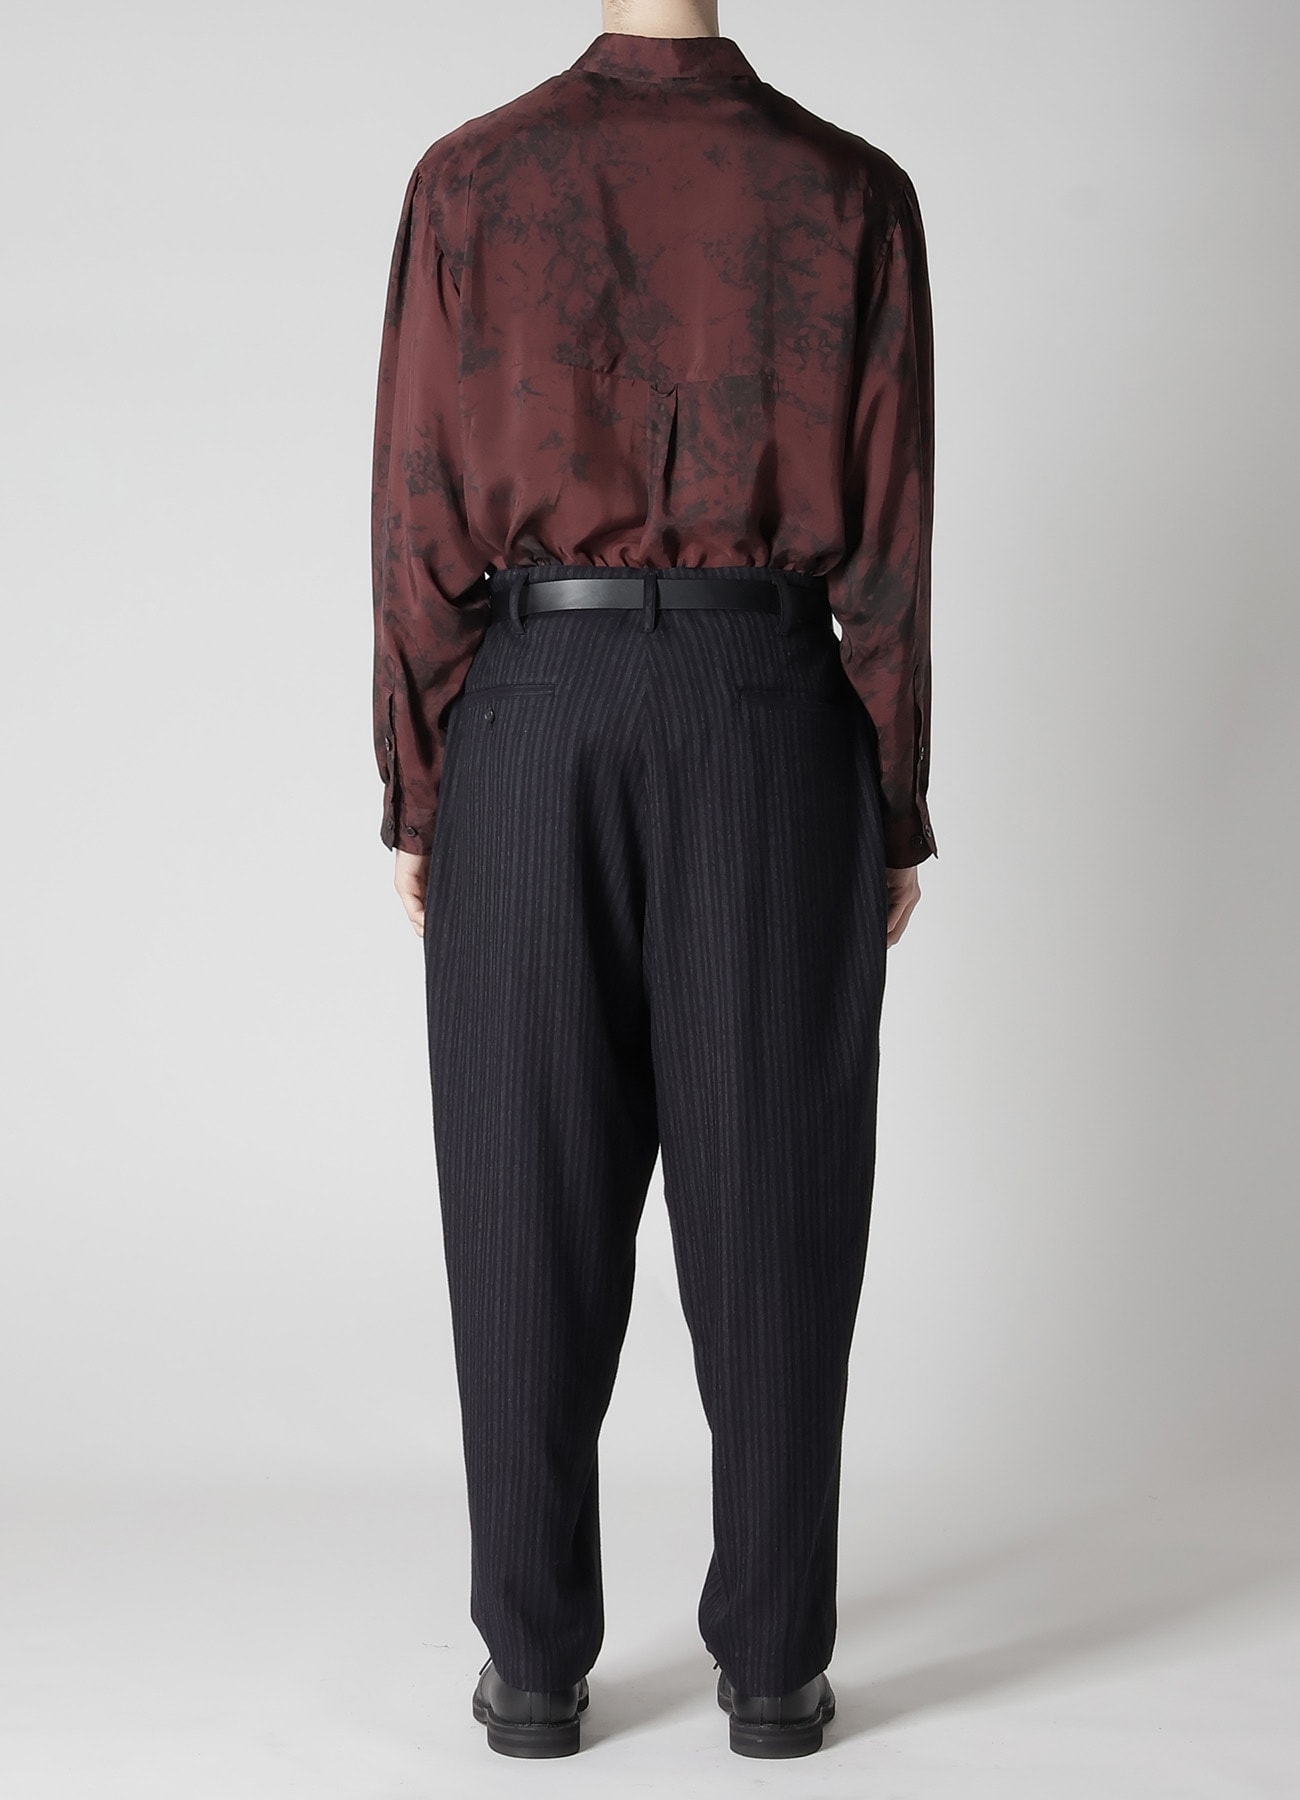 RAYON STRIPE PANTS WITH SIDE TUCK